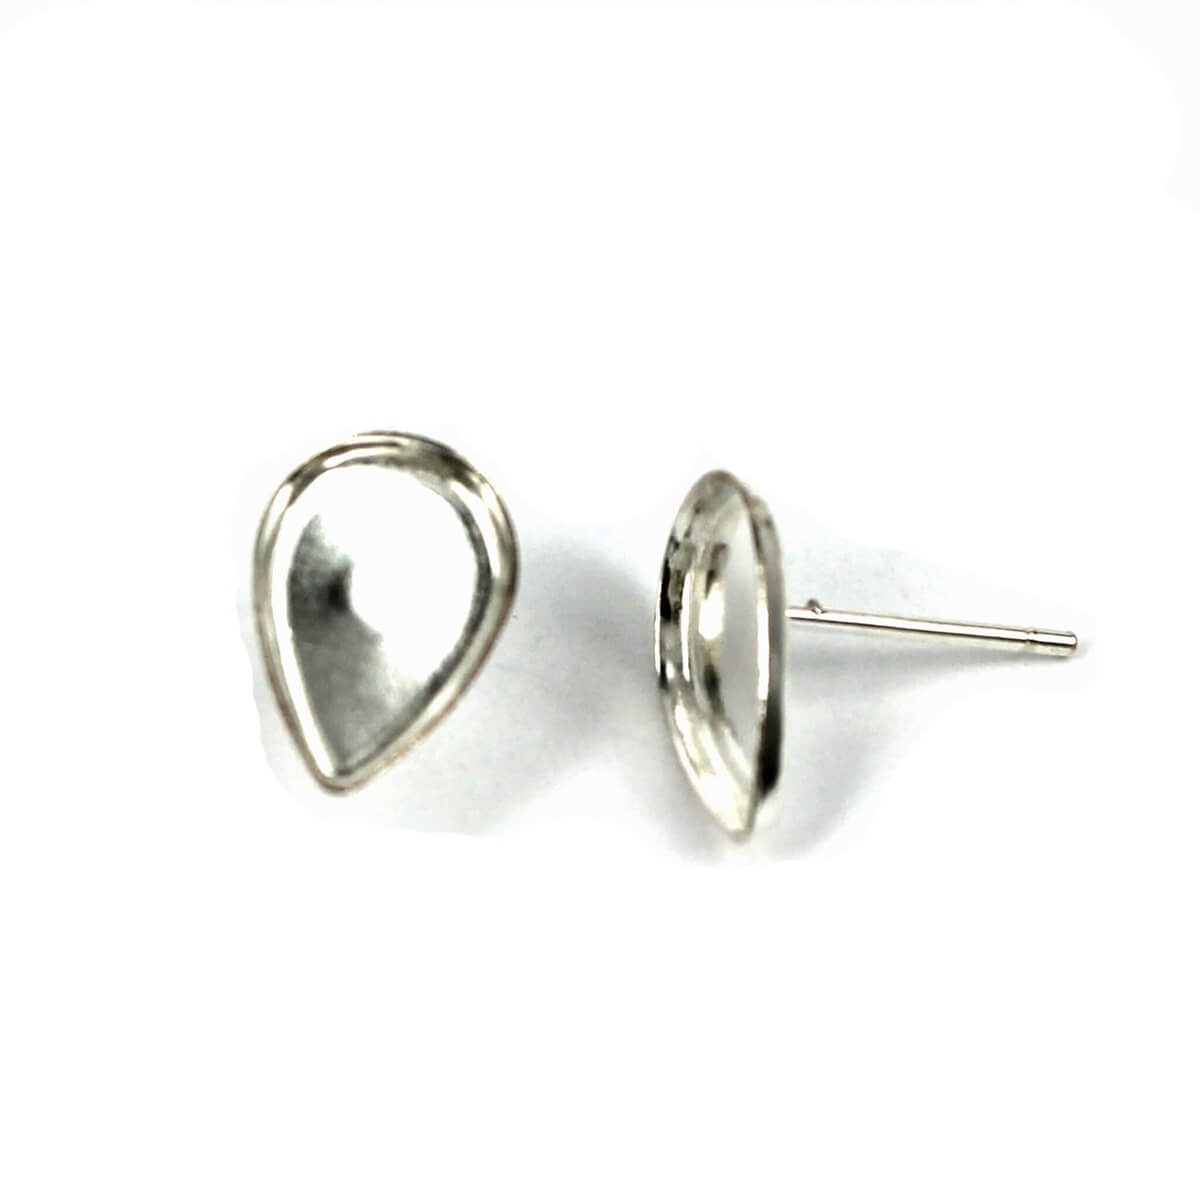 Ear Studs with Pear Shape Mounting in Sterling Silver 8x12mm 